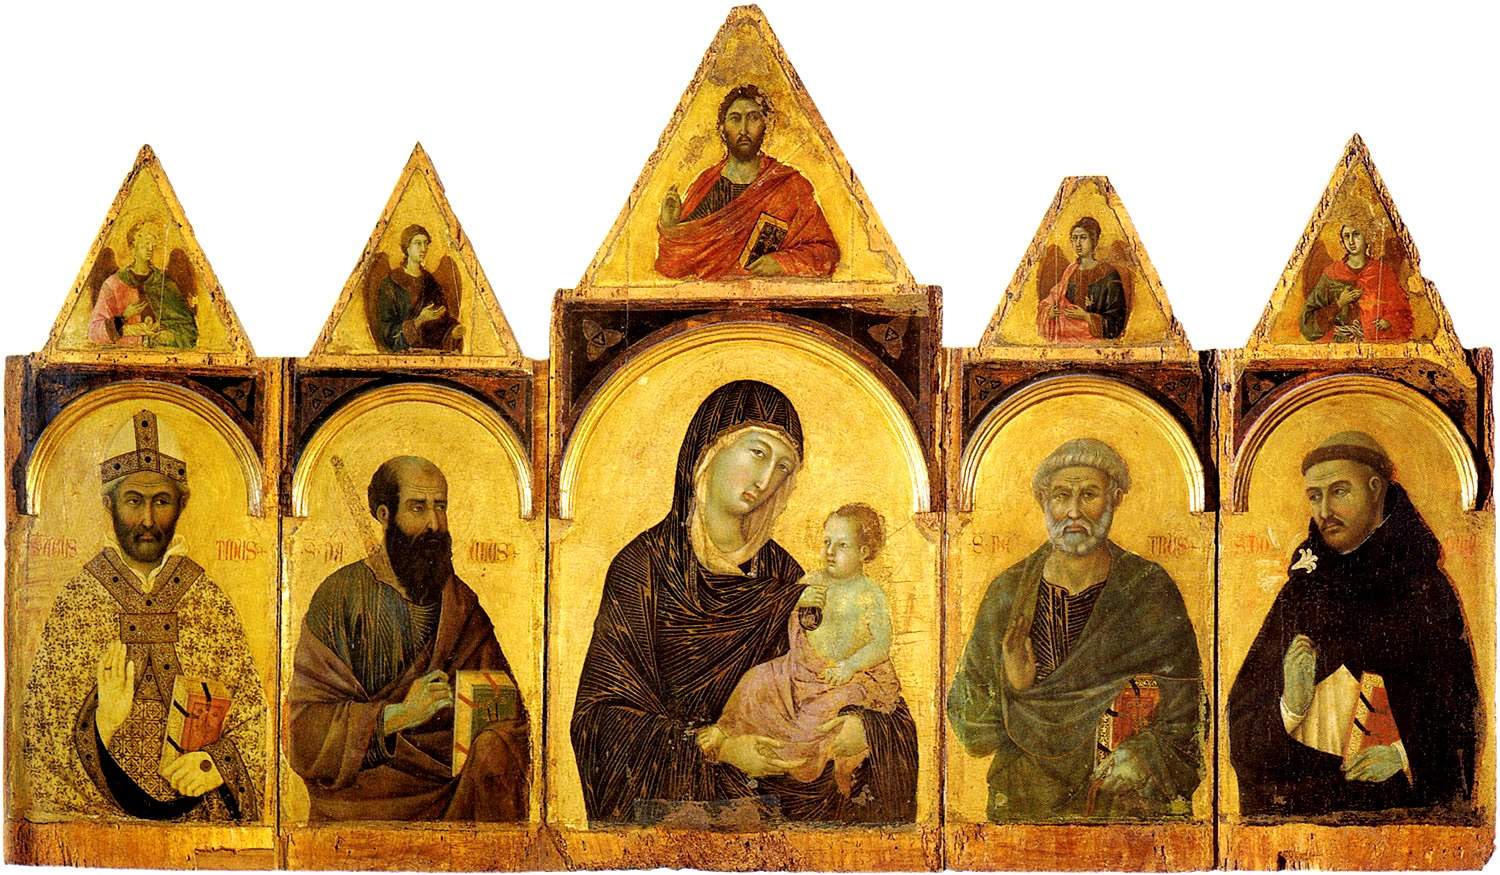 Duccio di Buoninsegna: life, works and masterpieces of the great Sienese  painter